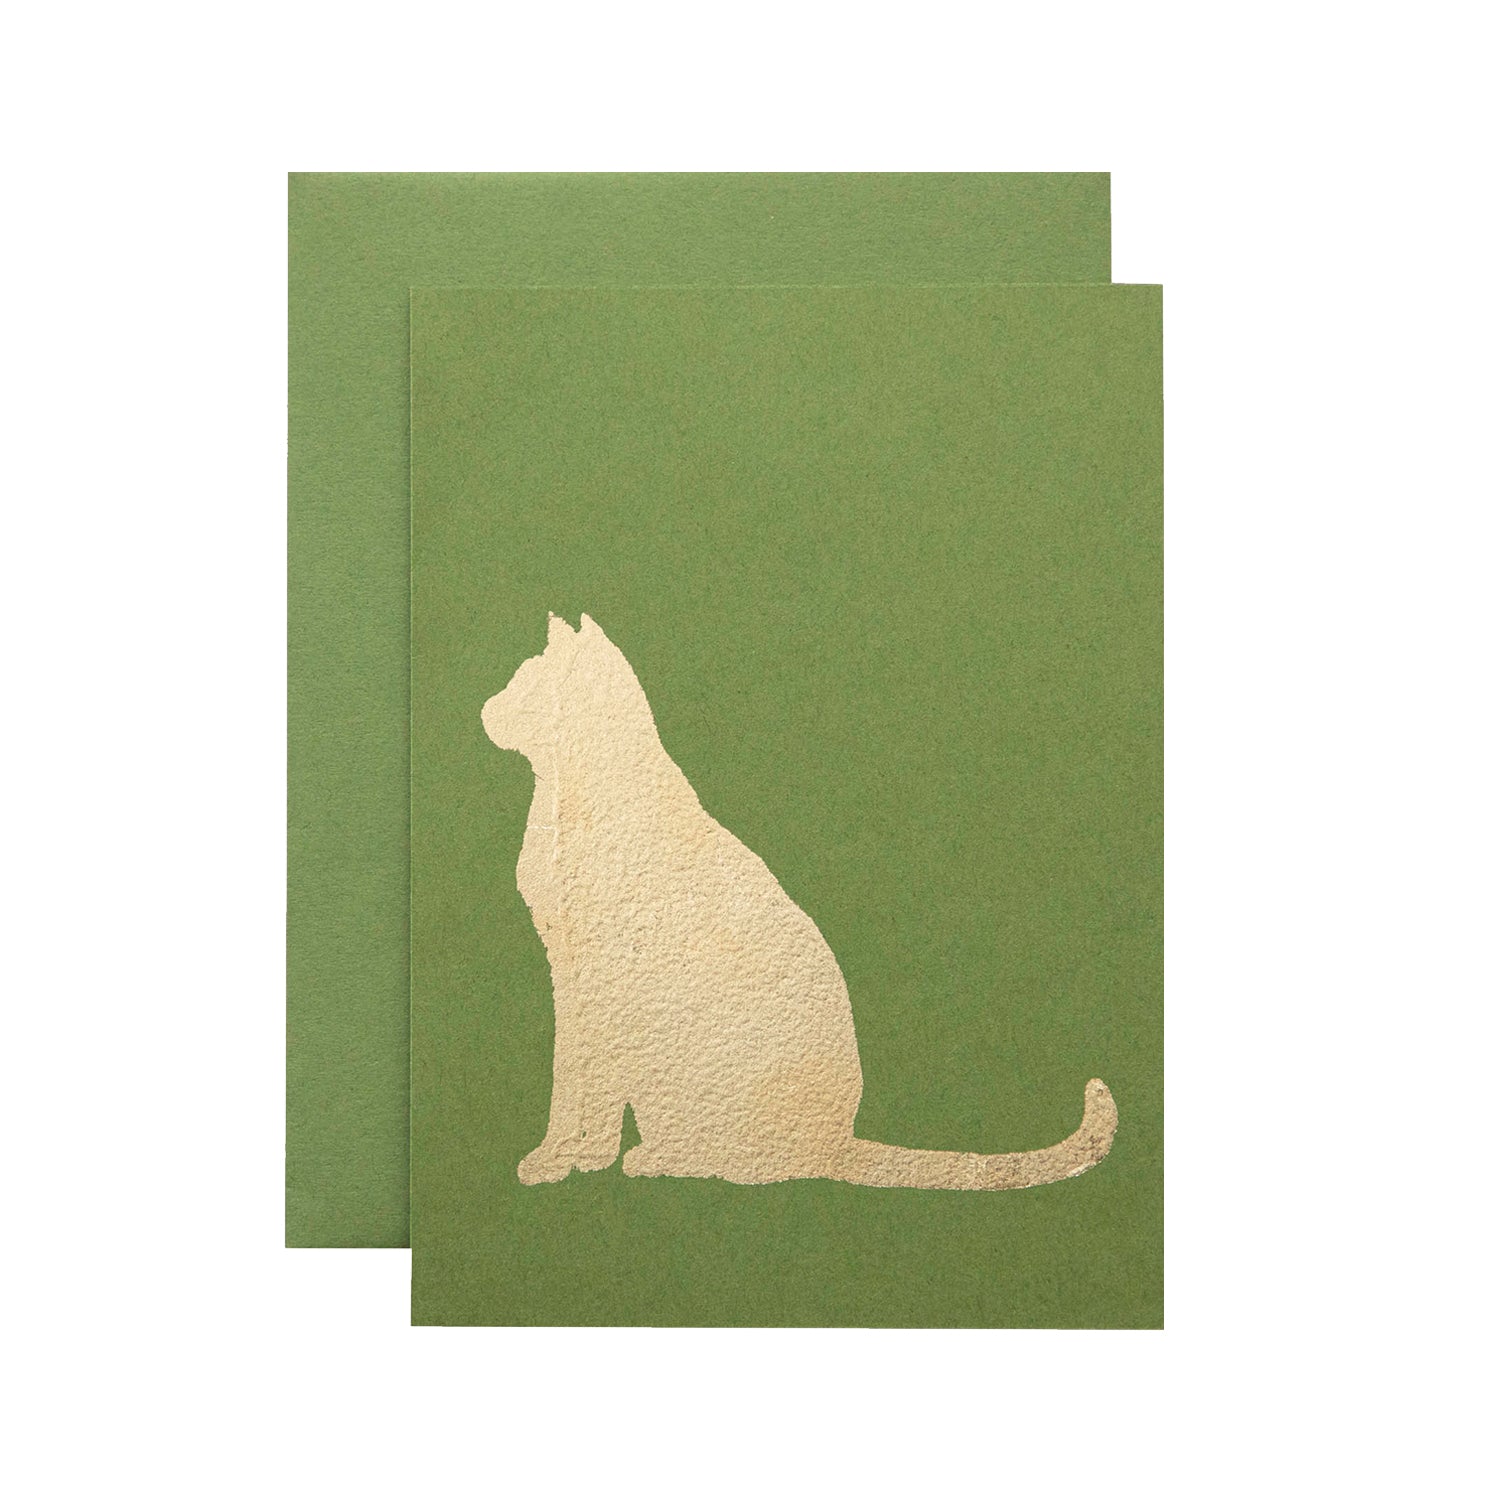 A Green Cat Card adorned with a silhouette of a cat, accented with delicate gold leaf detailing by Hester &amp; Cook.